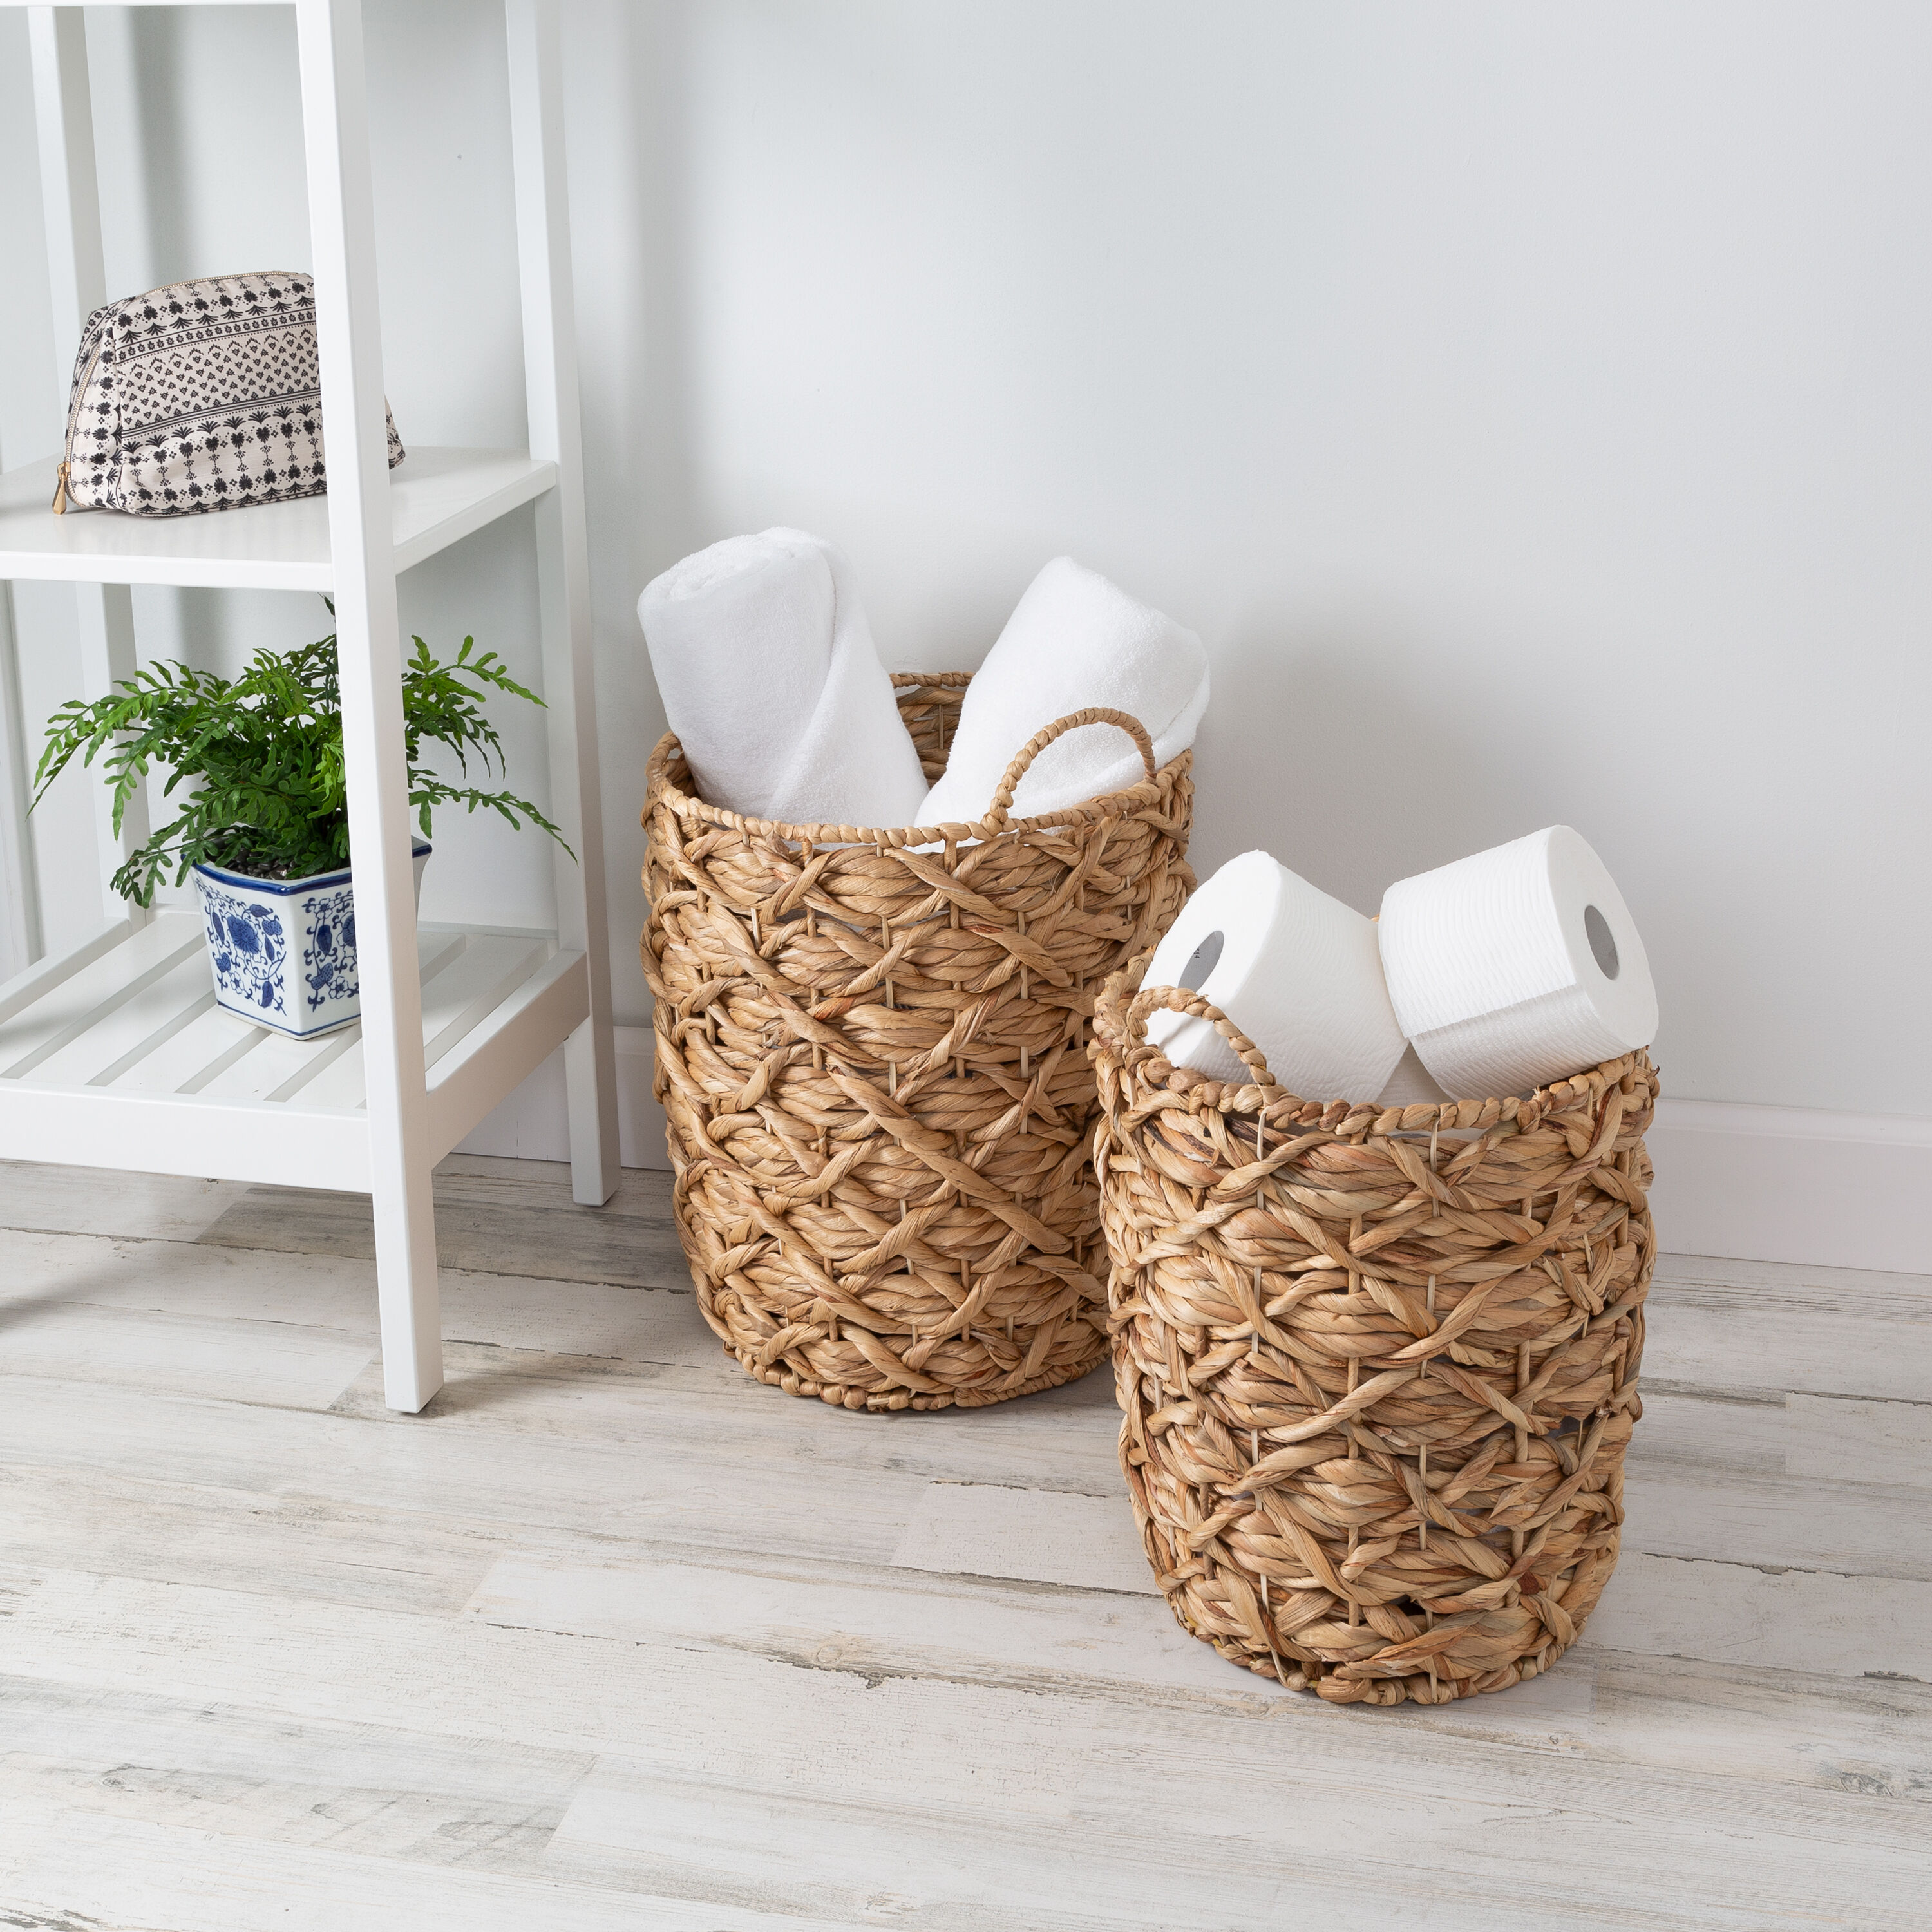 Birdrock Home XL Collapsible Laundry Basket Caddy - Natural, Brown